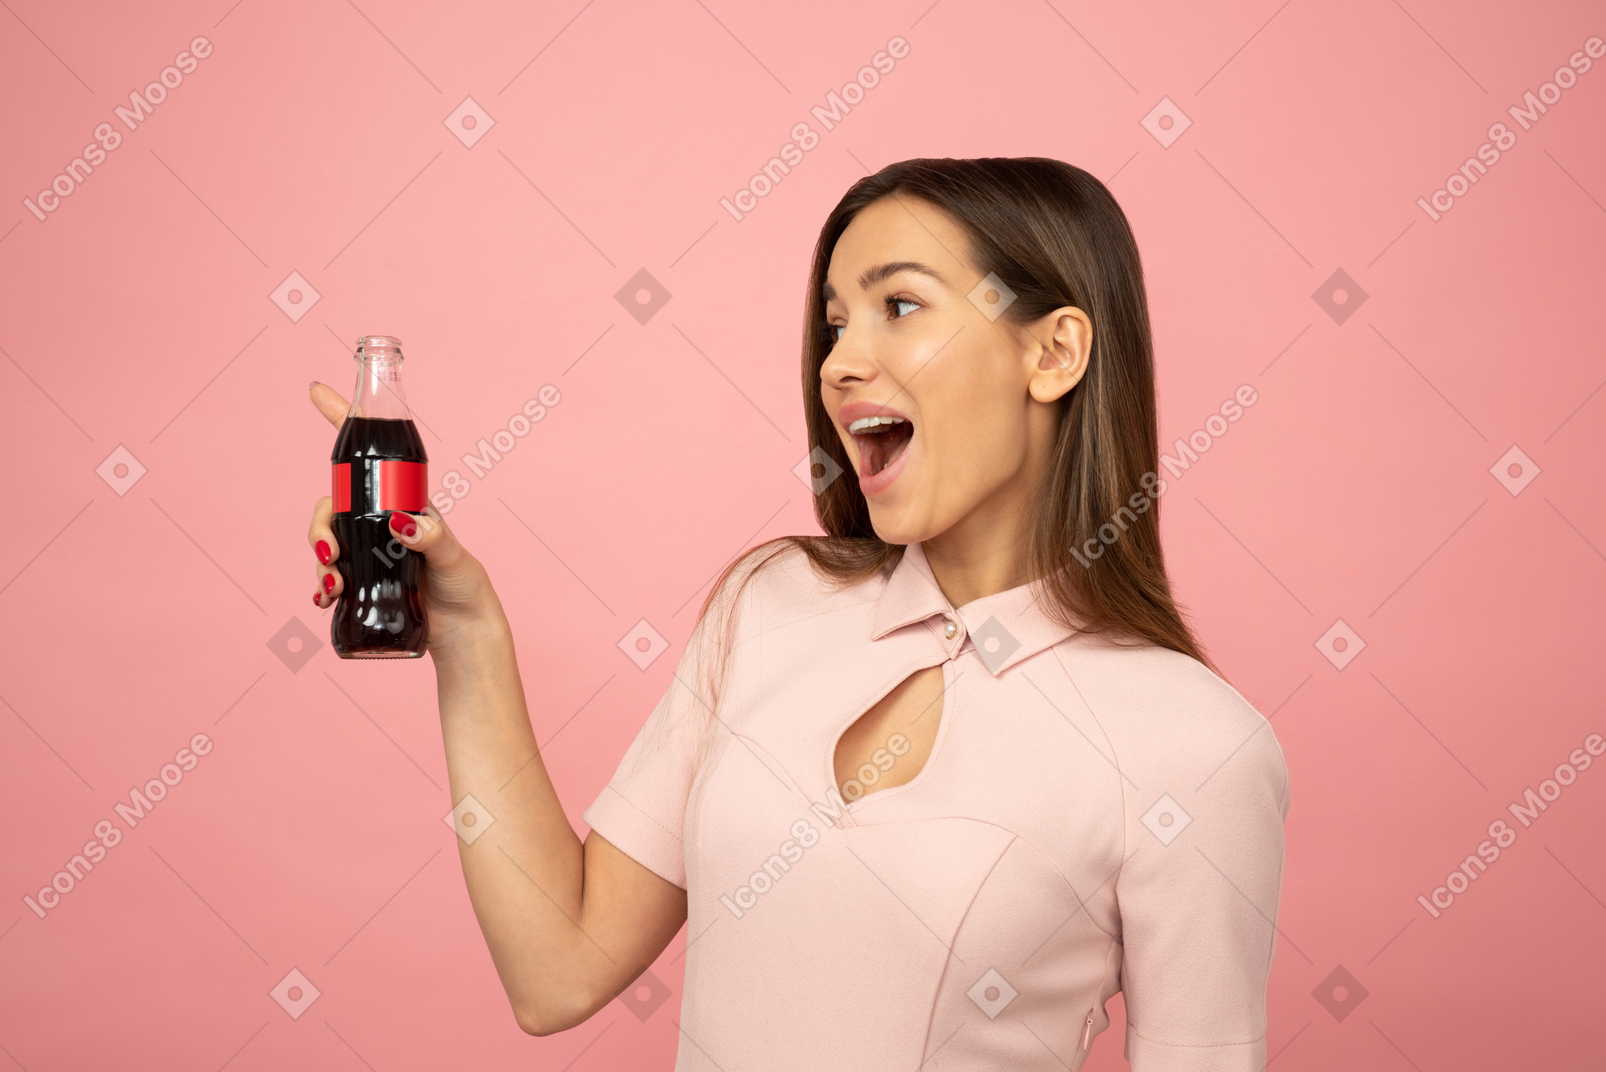 Amused girl  holding a bottle glass and pointing at something